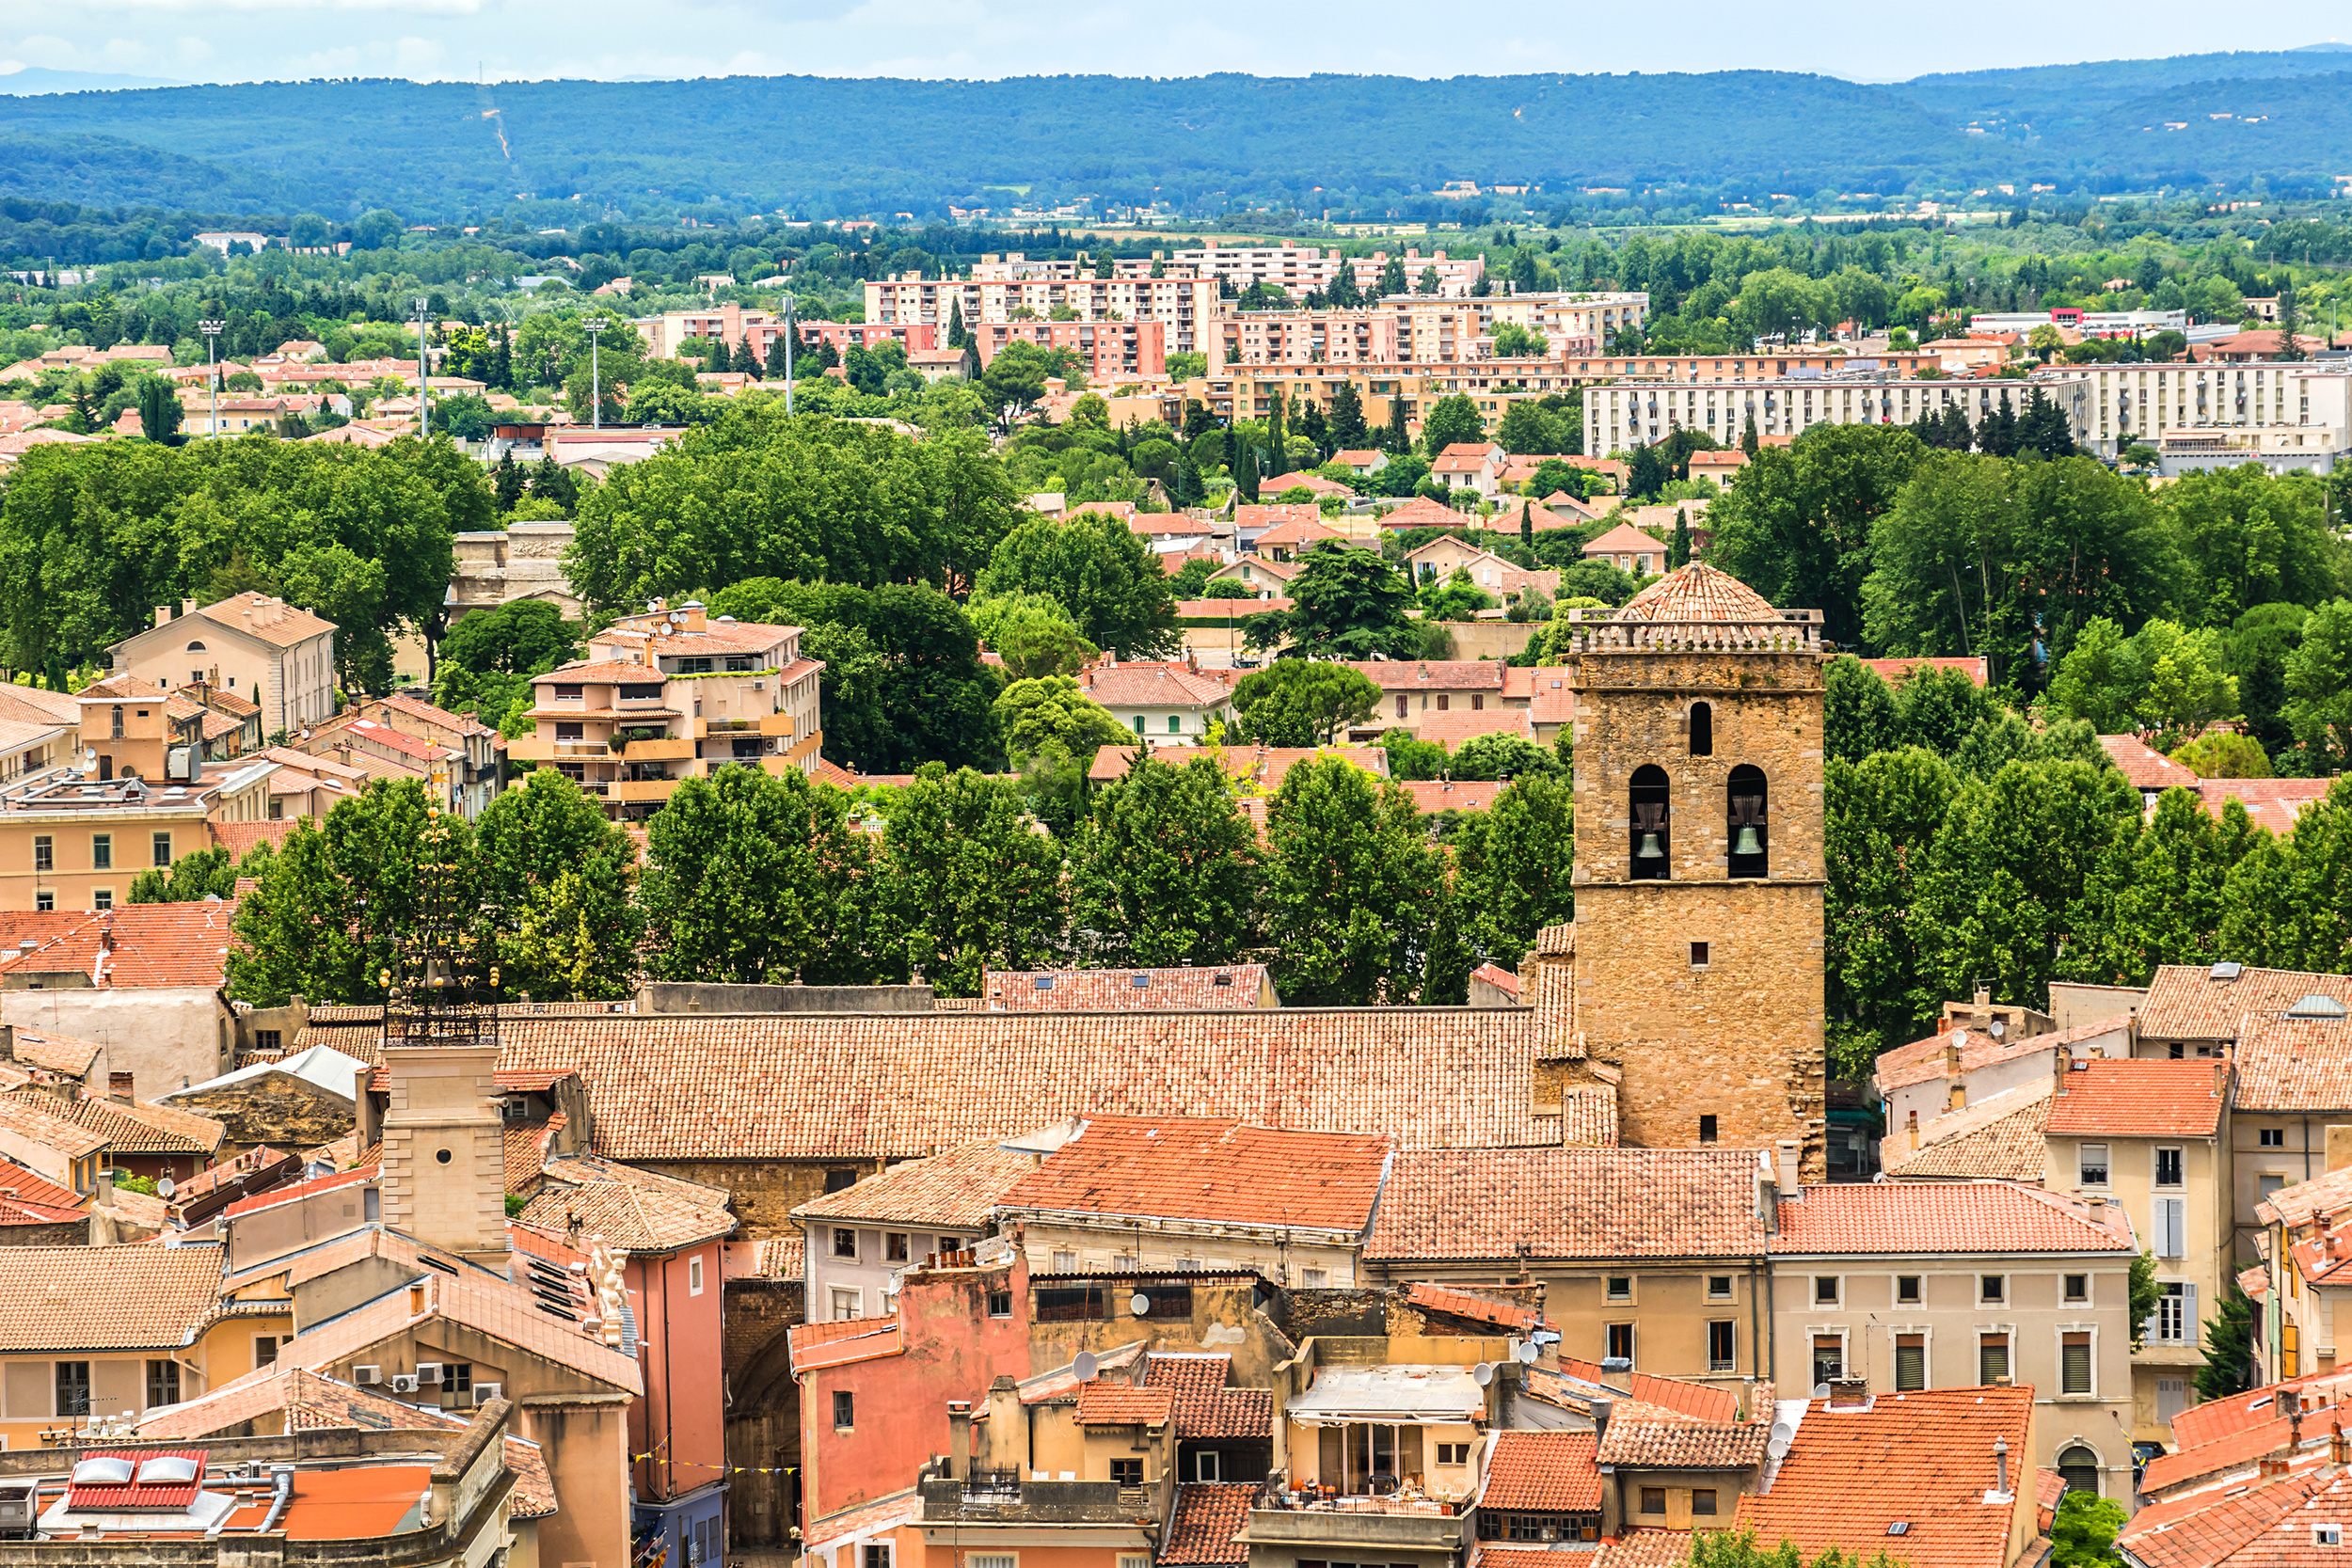 <p>Orange is a fantastic town a few minutes from Avignon. It has one of the most impressive arenas from Roman times. It also has a thriving art community, and you'll have a great time browsing boutiques all around town.</p><p><a href='https://www.msn.com/en-us/community/channel/vid-cj9pqbr0vn9in2b6ddcd8sfgpfq6x6utp44fssrv6mc2gtybw0us'>Follow us on MSN to see more of our exclusive lifestyle content.</a></p>